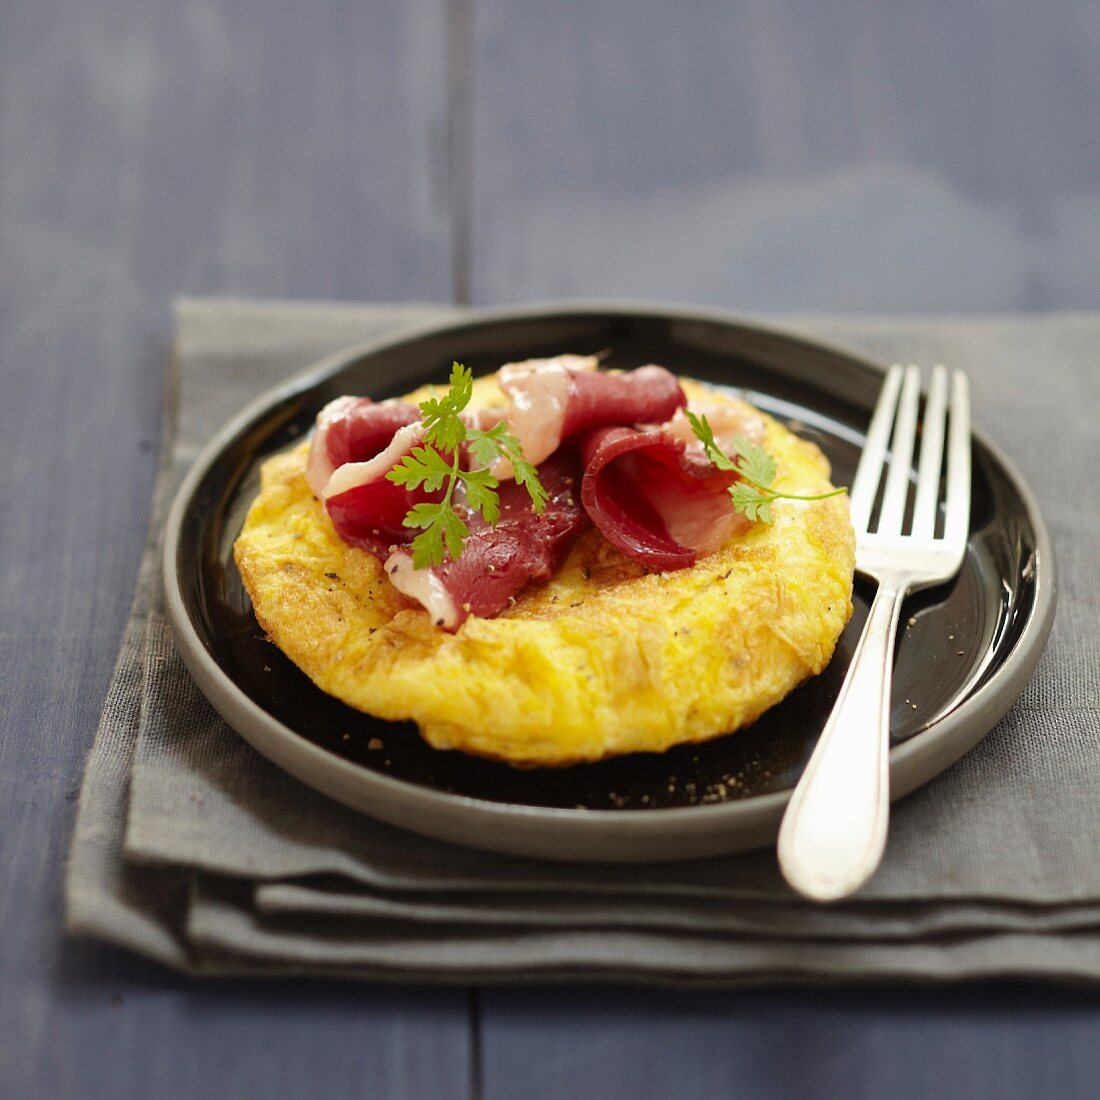 Cheese omelette with duck magret